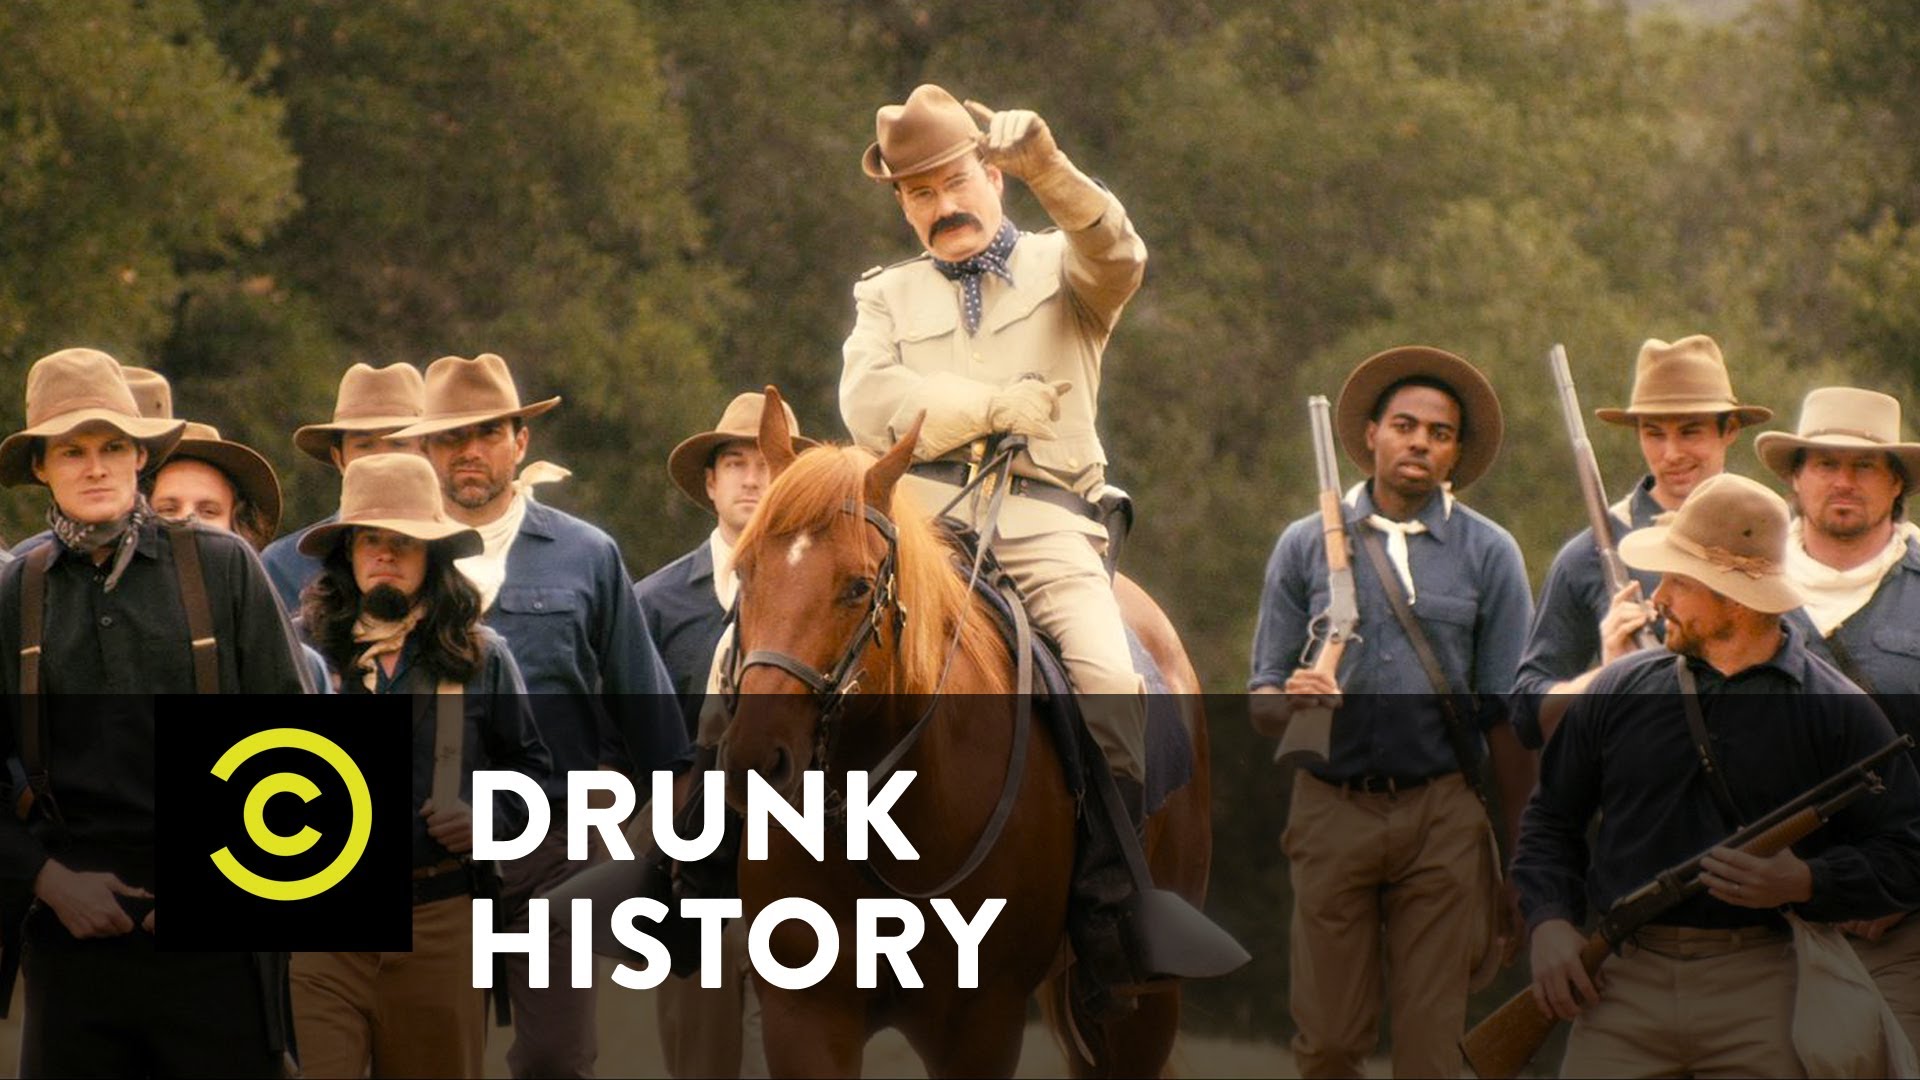 Drunk History - Teddy Roosevelt and the Rough Riders